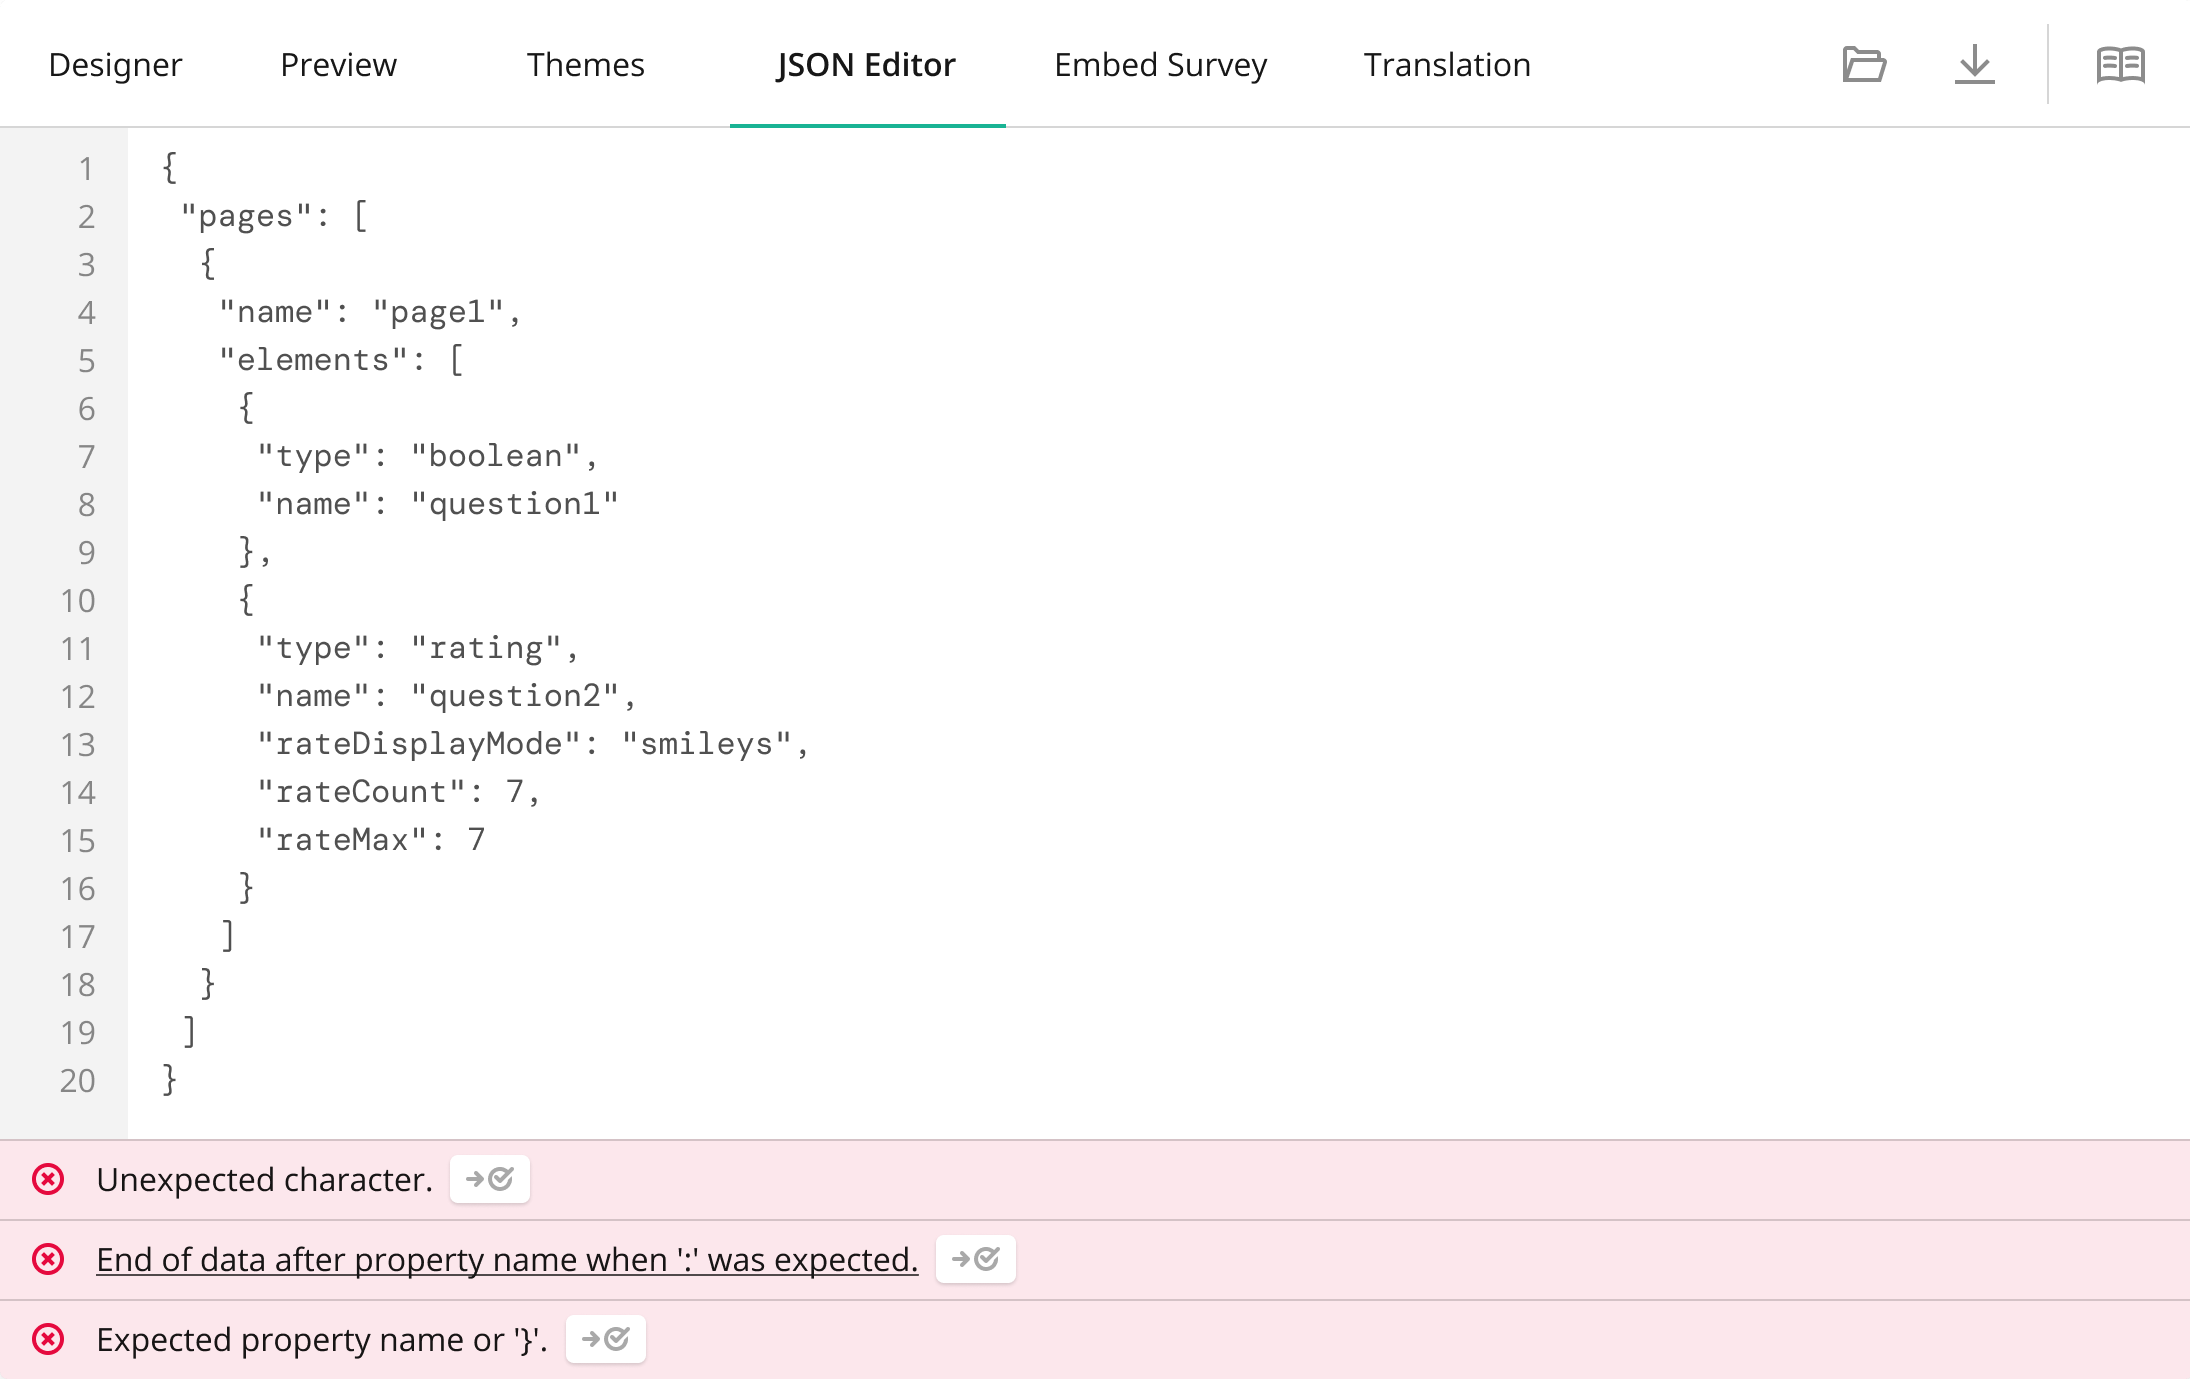 Survey Creator: Quick fix for errors in the JSON Editor tab